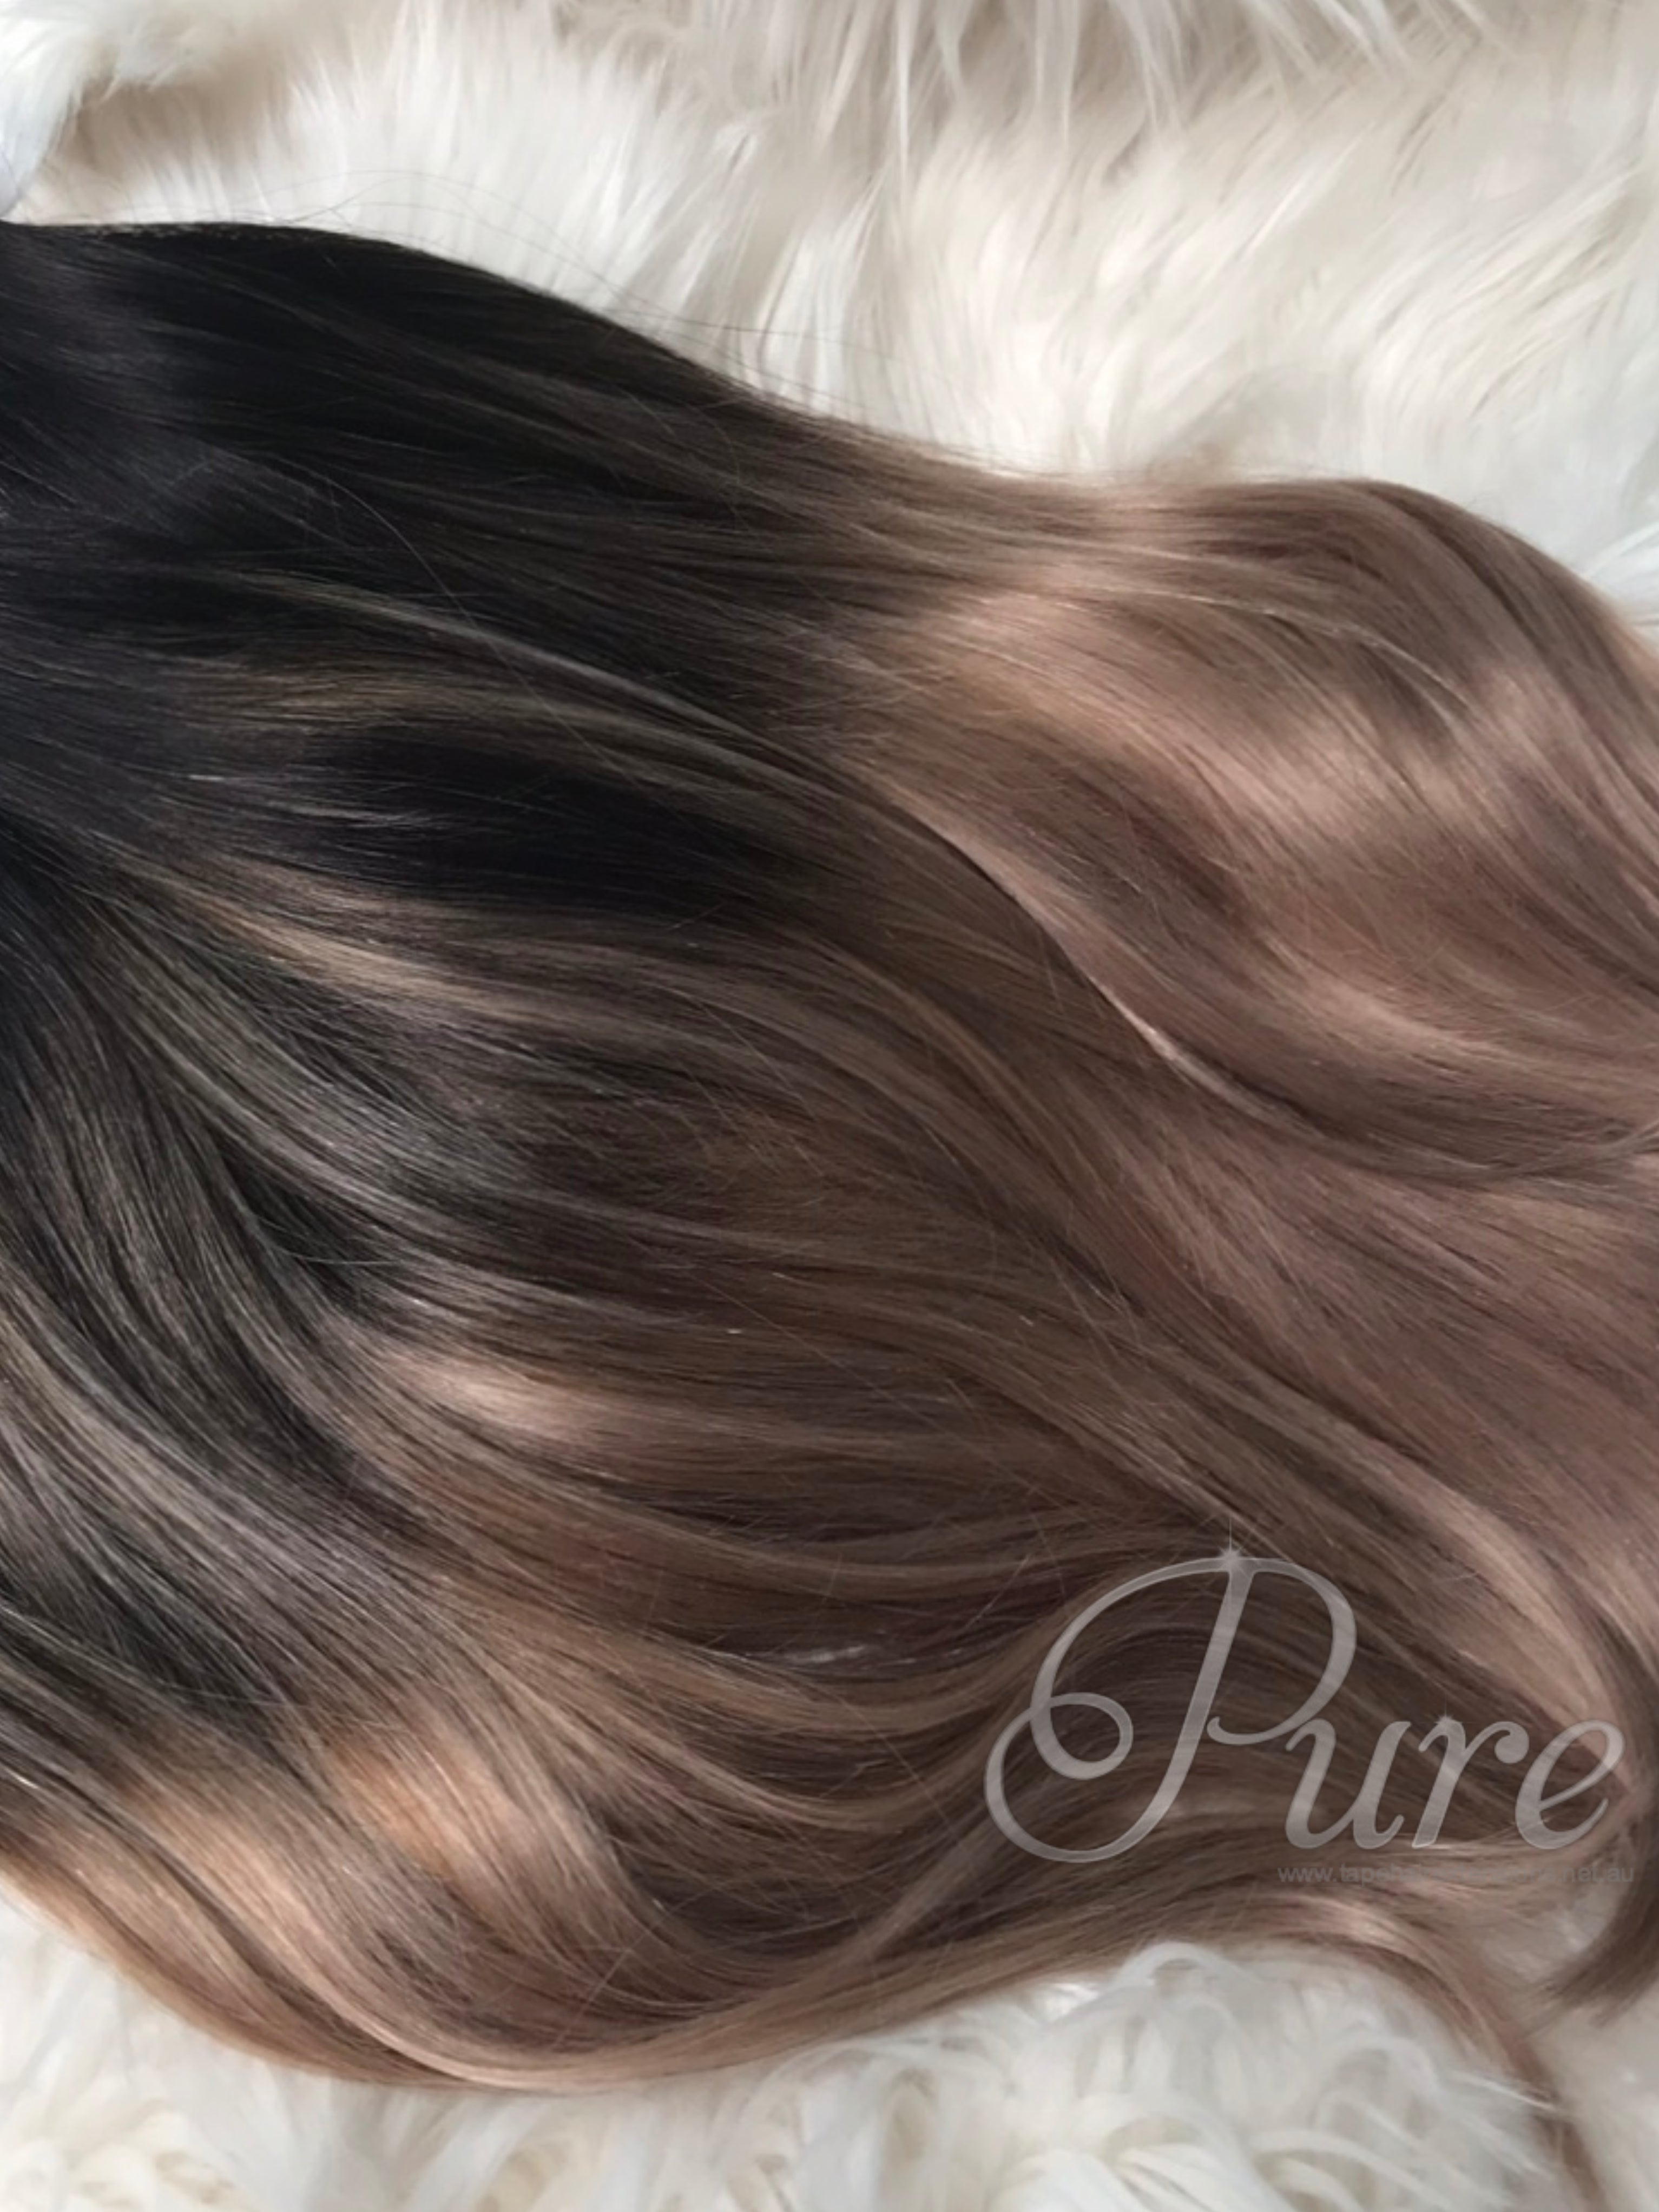 BLACK TO DARK BLONDE HIGHLIGHTED TAPE-IN HAIR EXTENSIONS 